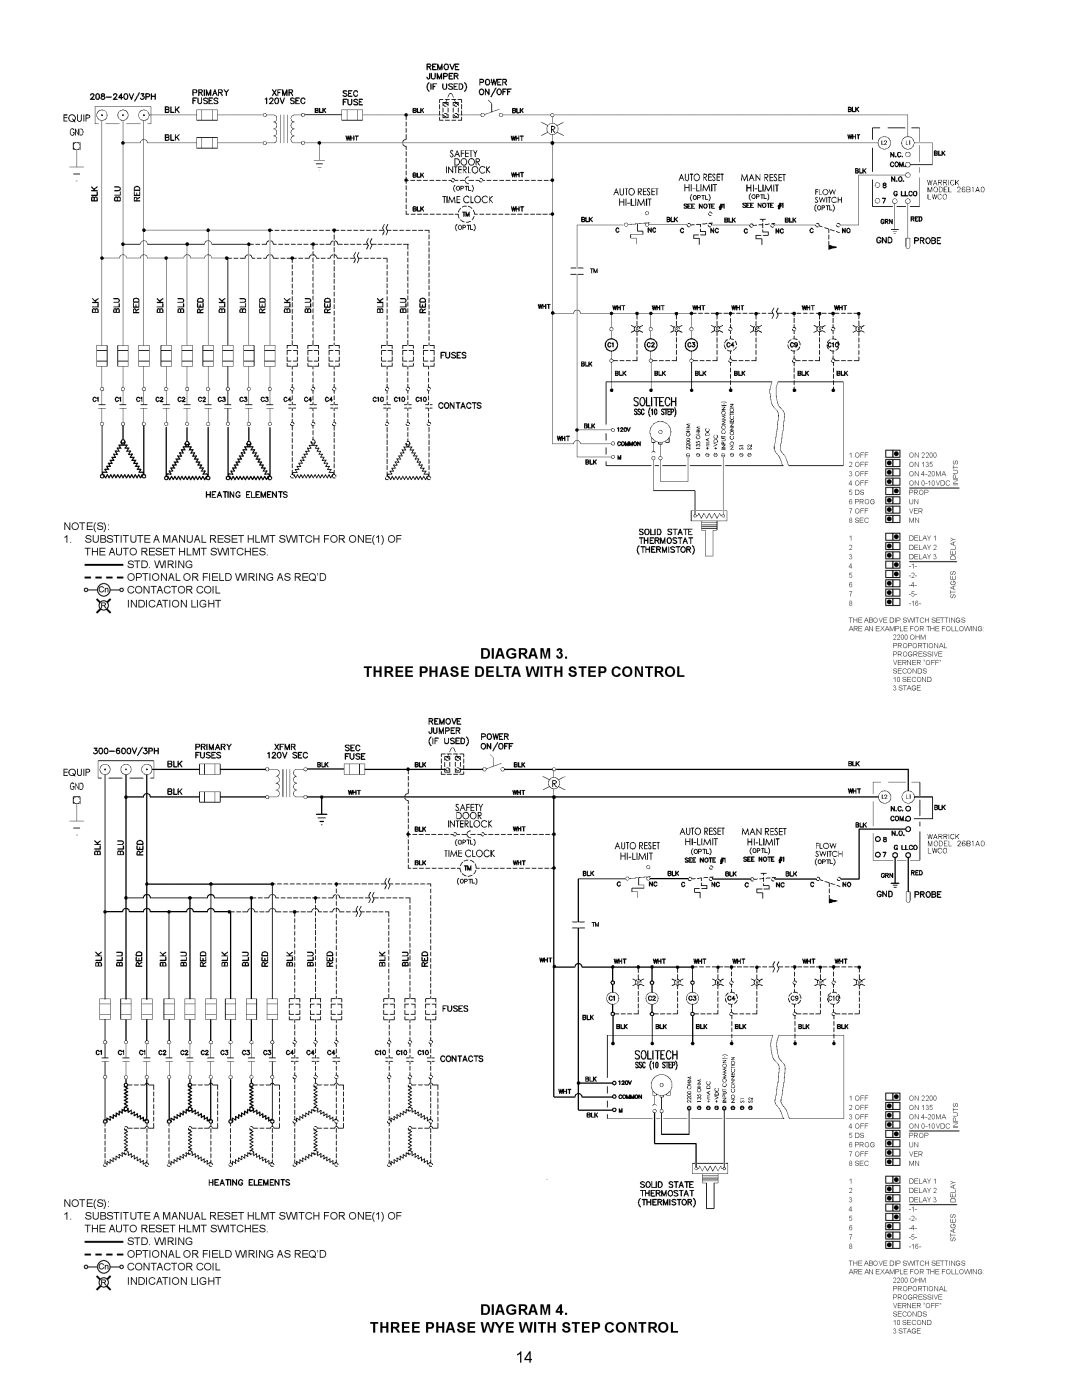 State Industries SW 37-670 Diagram Three Phase Delta With Step Control, Diagram Three Phase Wye With Step Control 